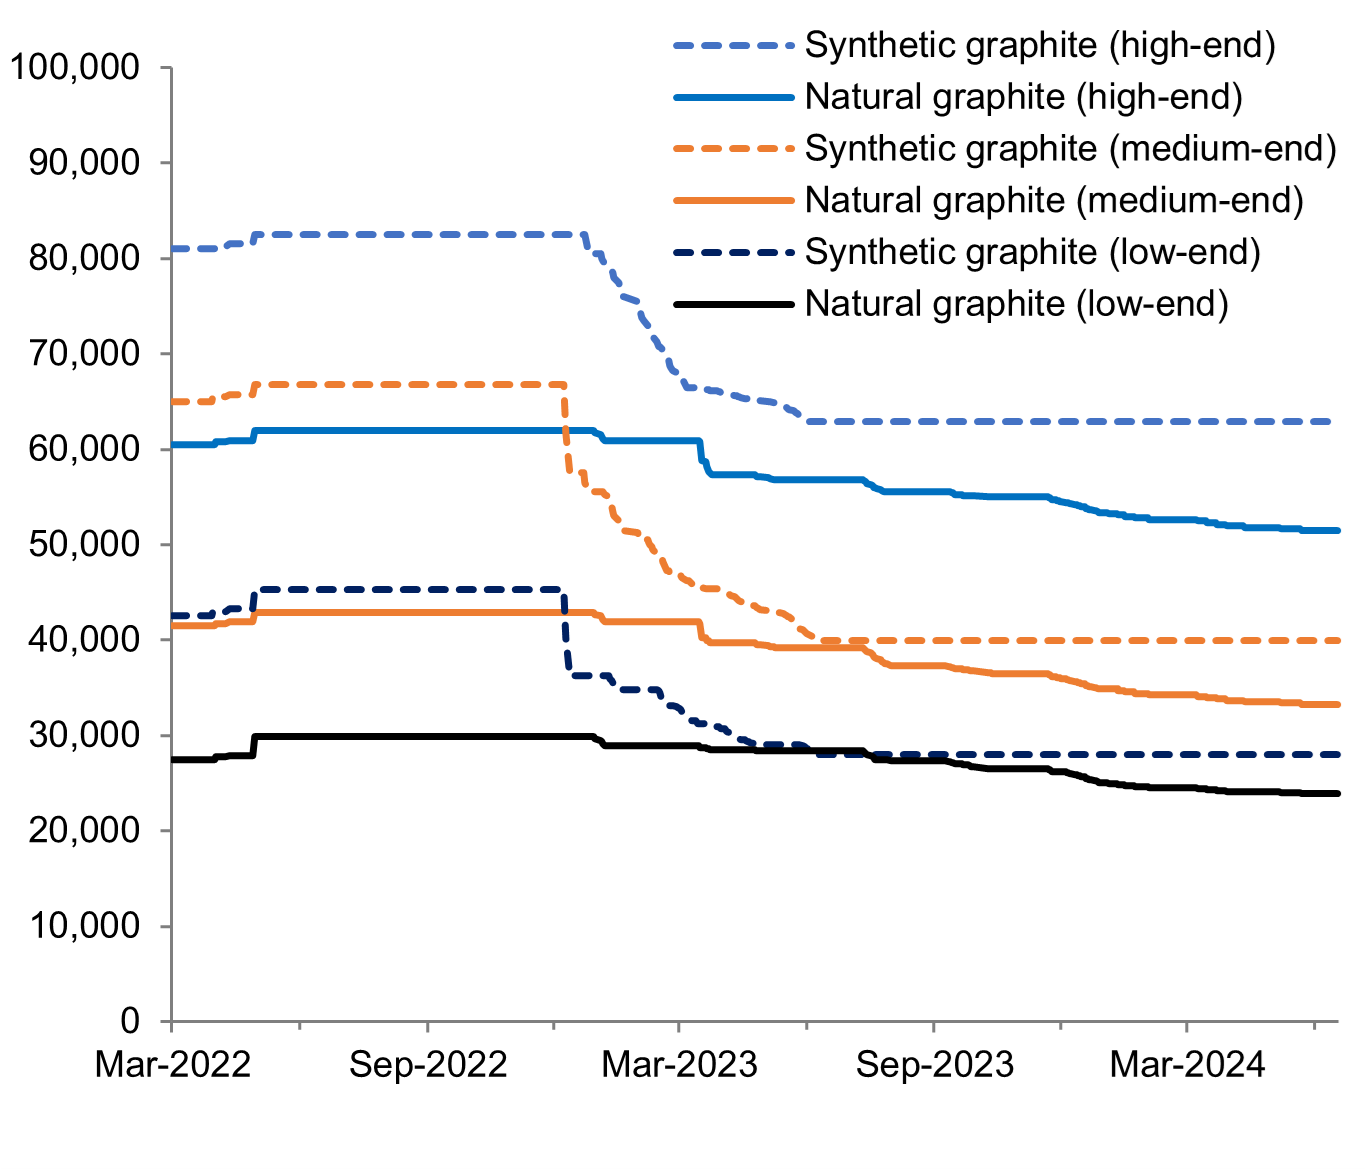 Natural and synthetic graphite prices, 2022-2024